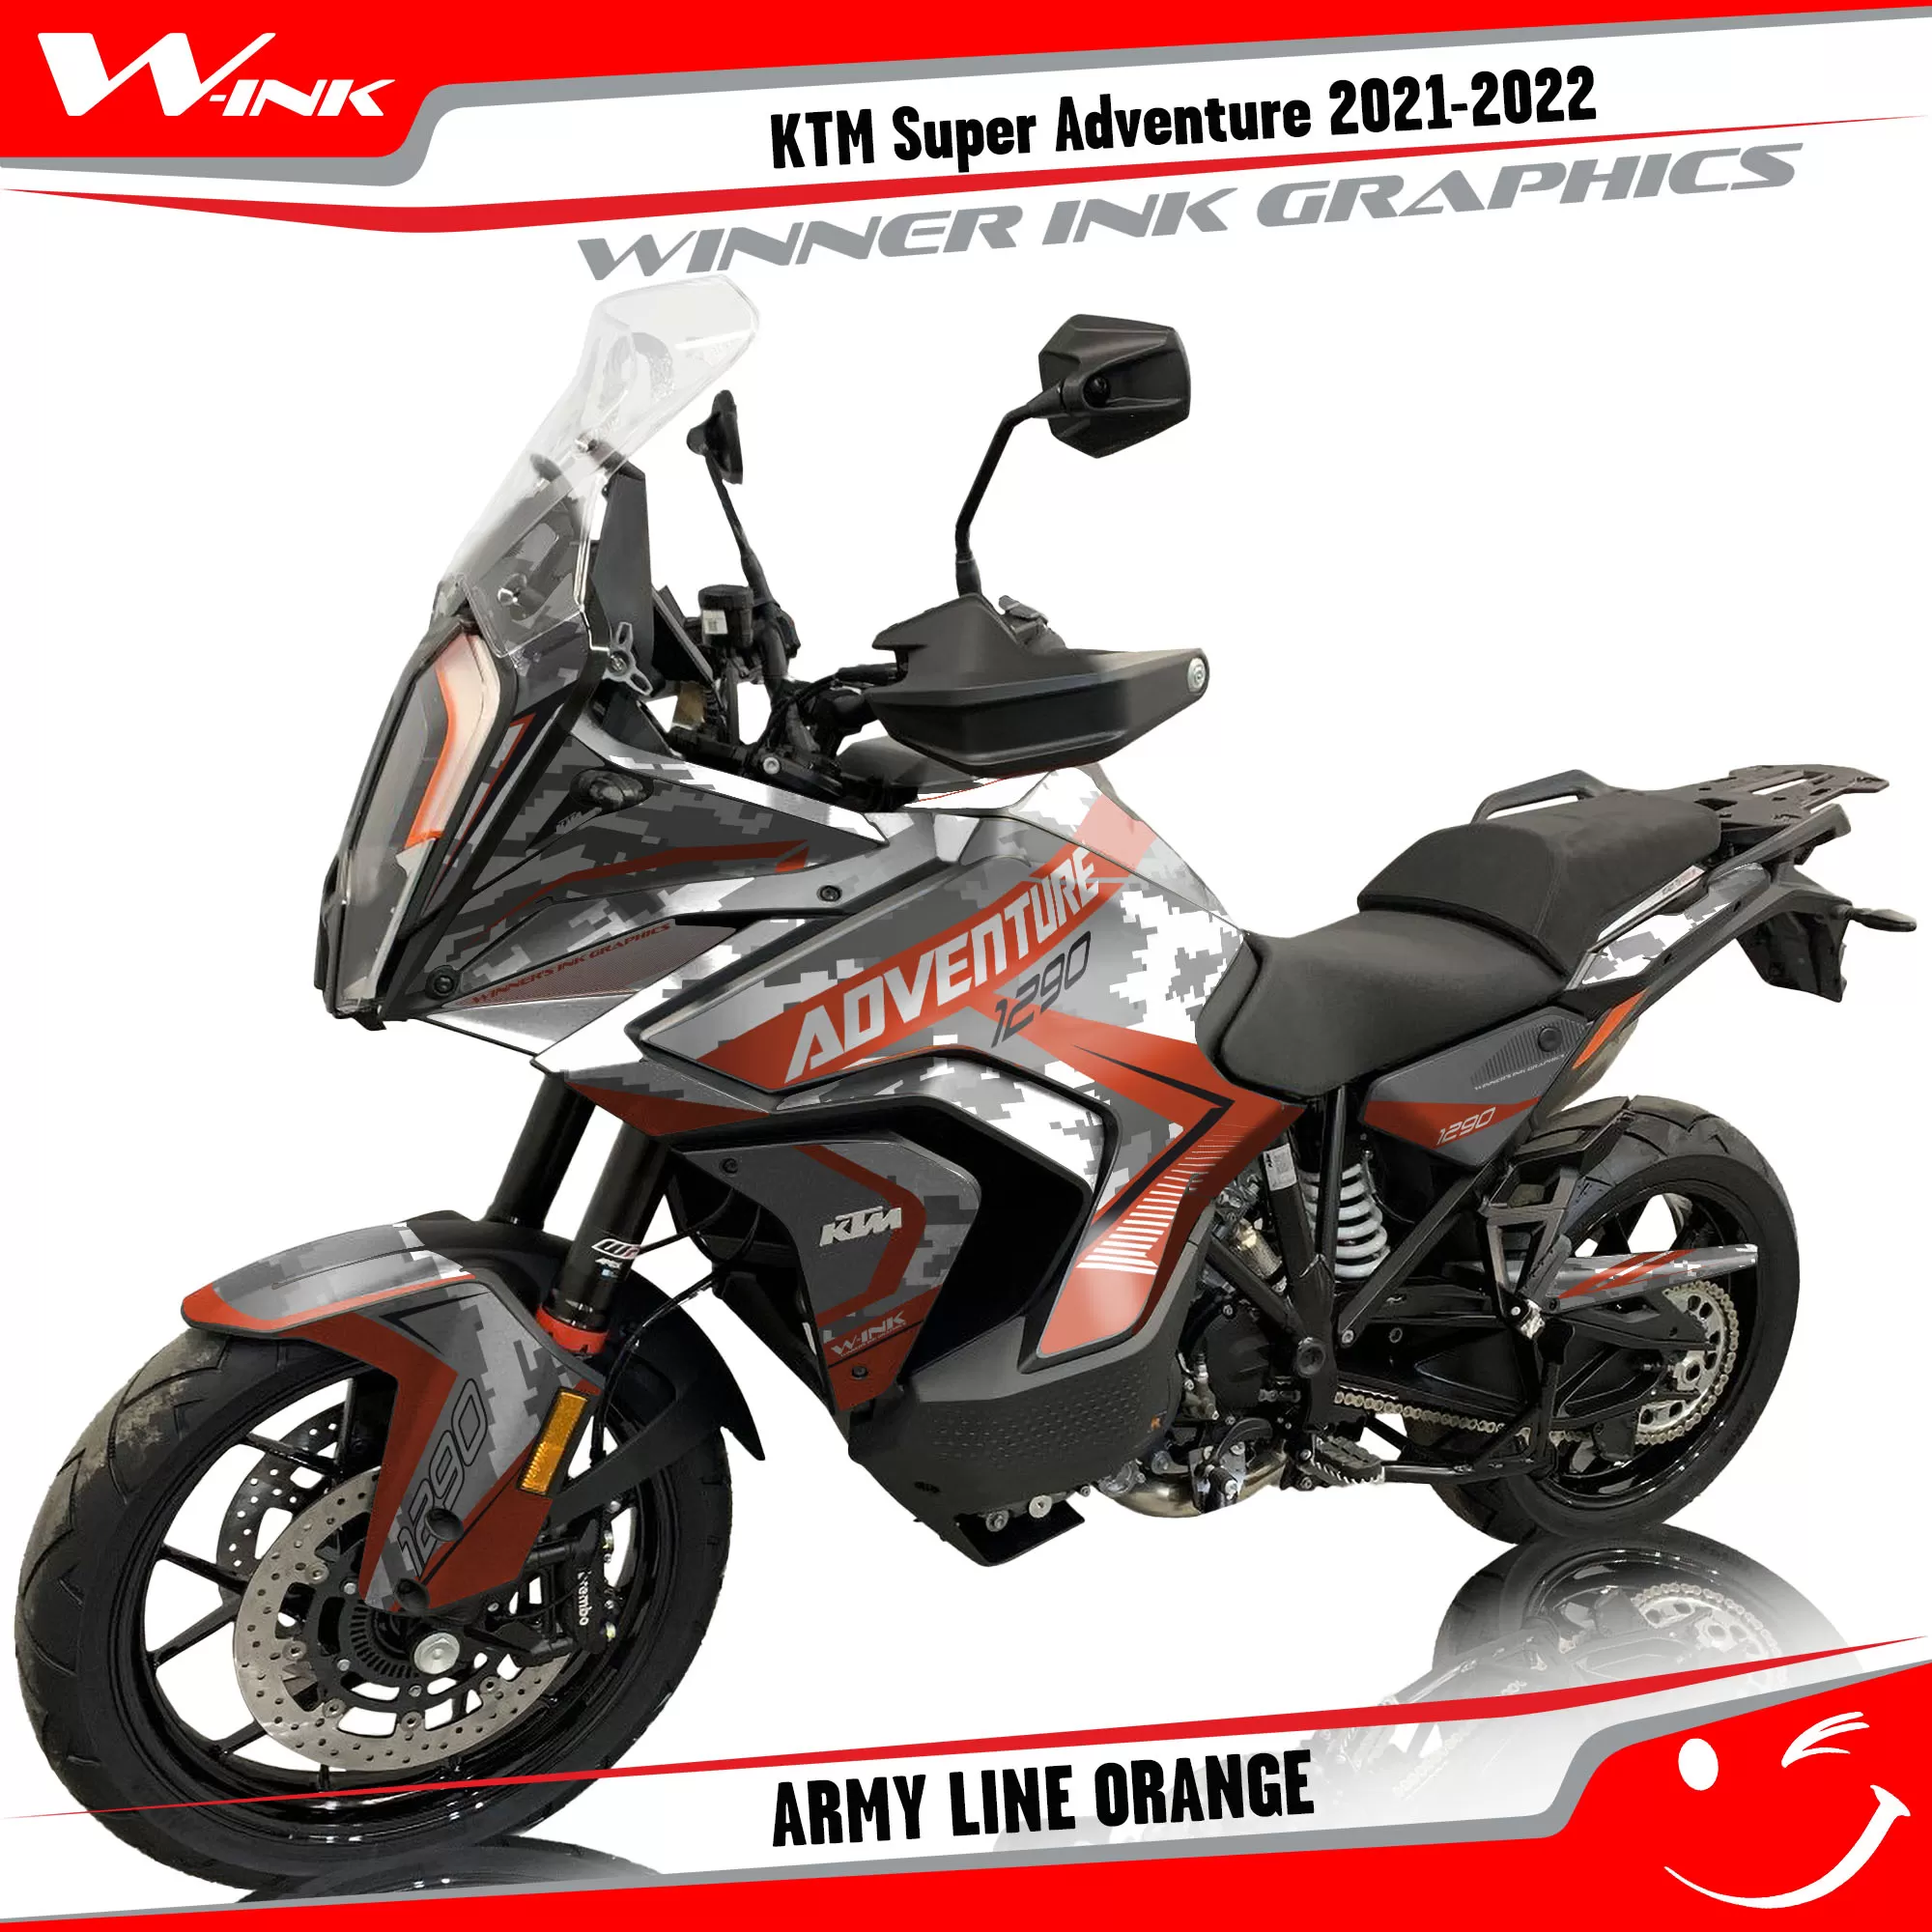 KTM-Super-Adventure-S-2021-2022-graphics-kit-and-decals-with-designs-Army-Line-Orange